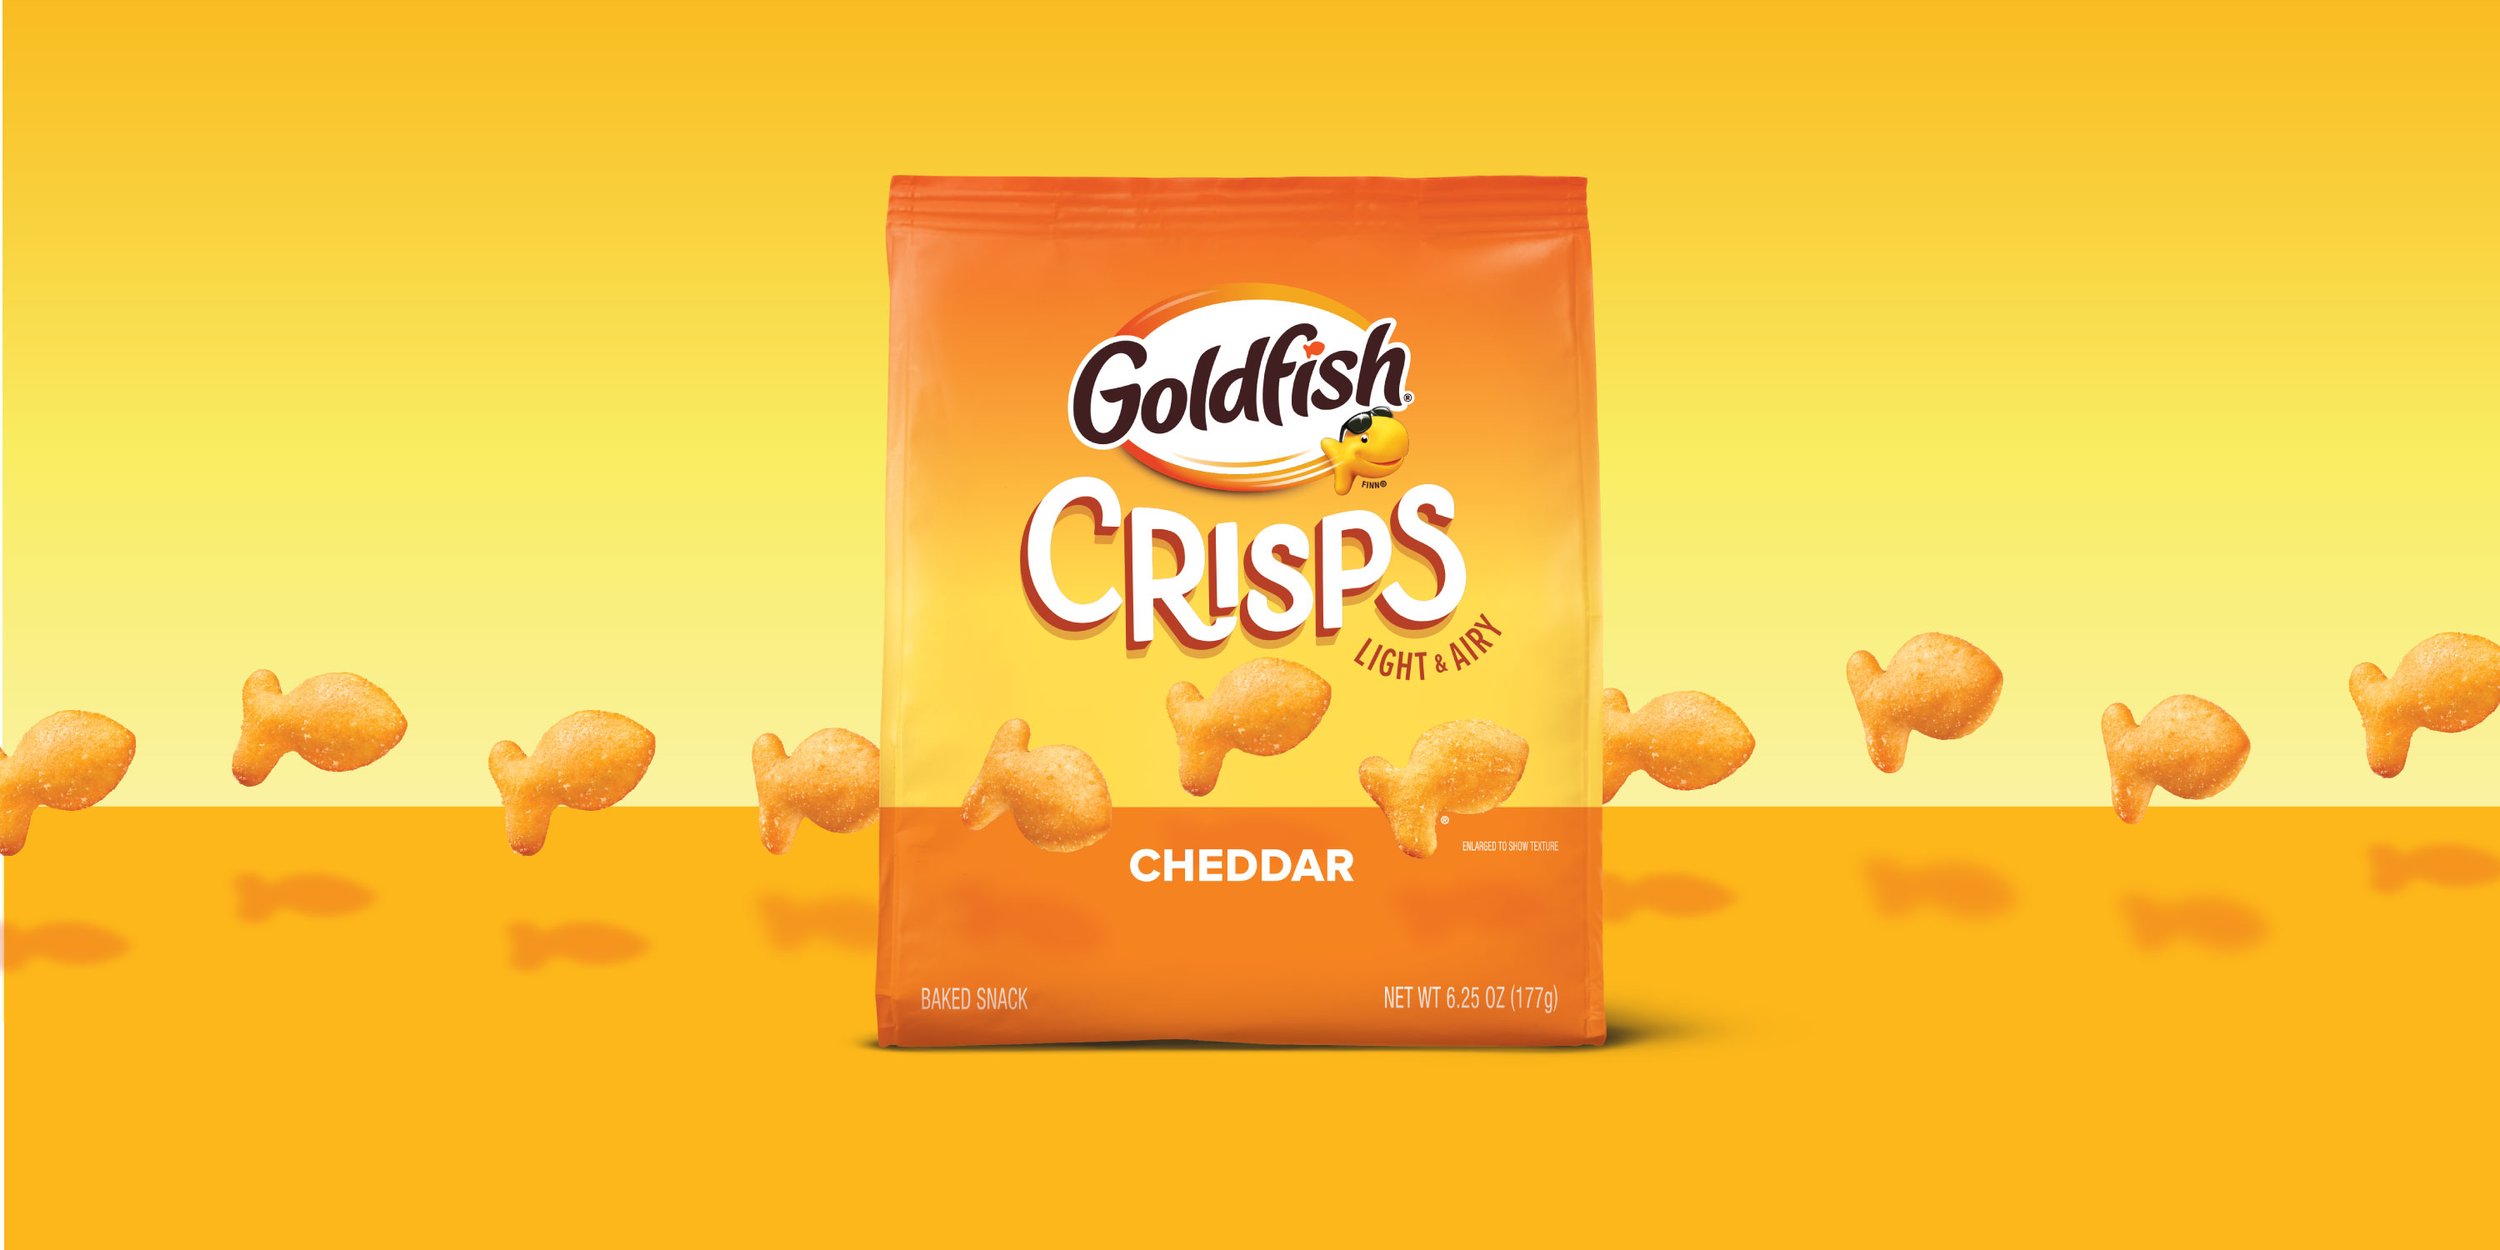 Fresh Flavors and Classic Charm With Sterling’s Goldfish Crisps Packaging